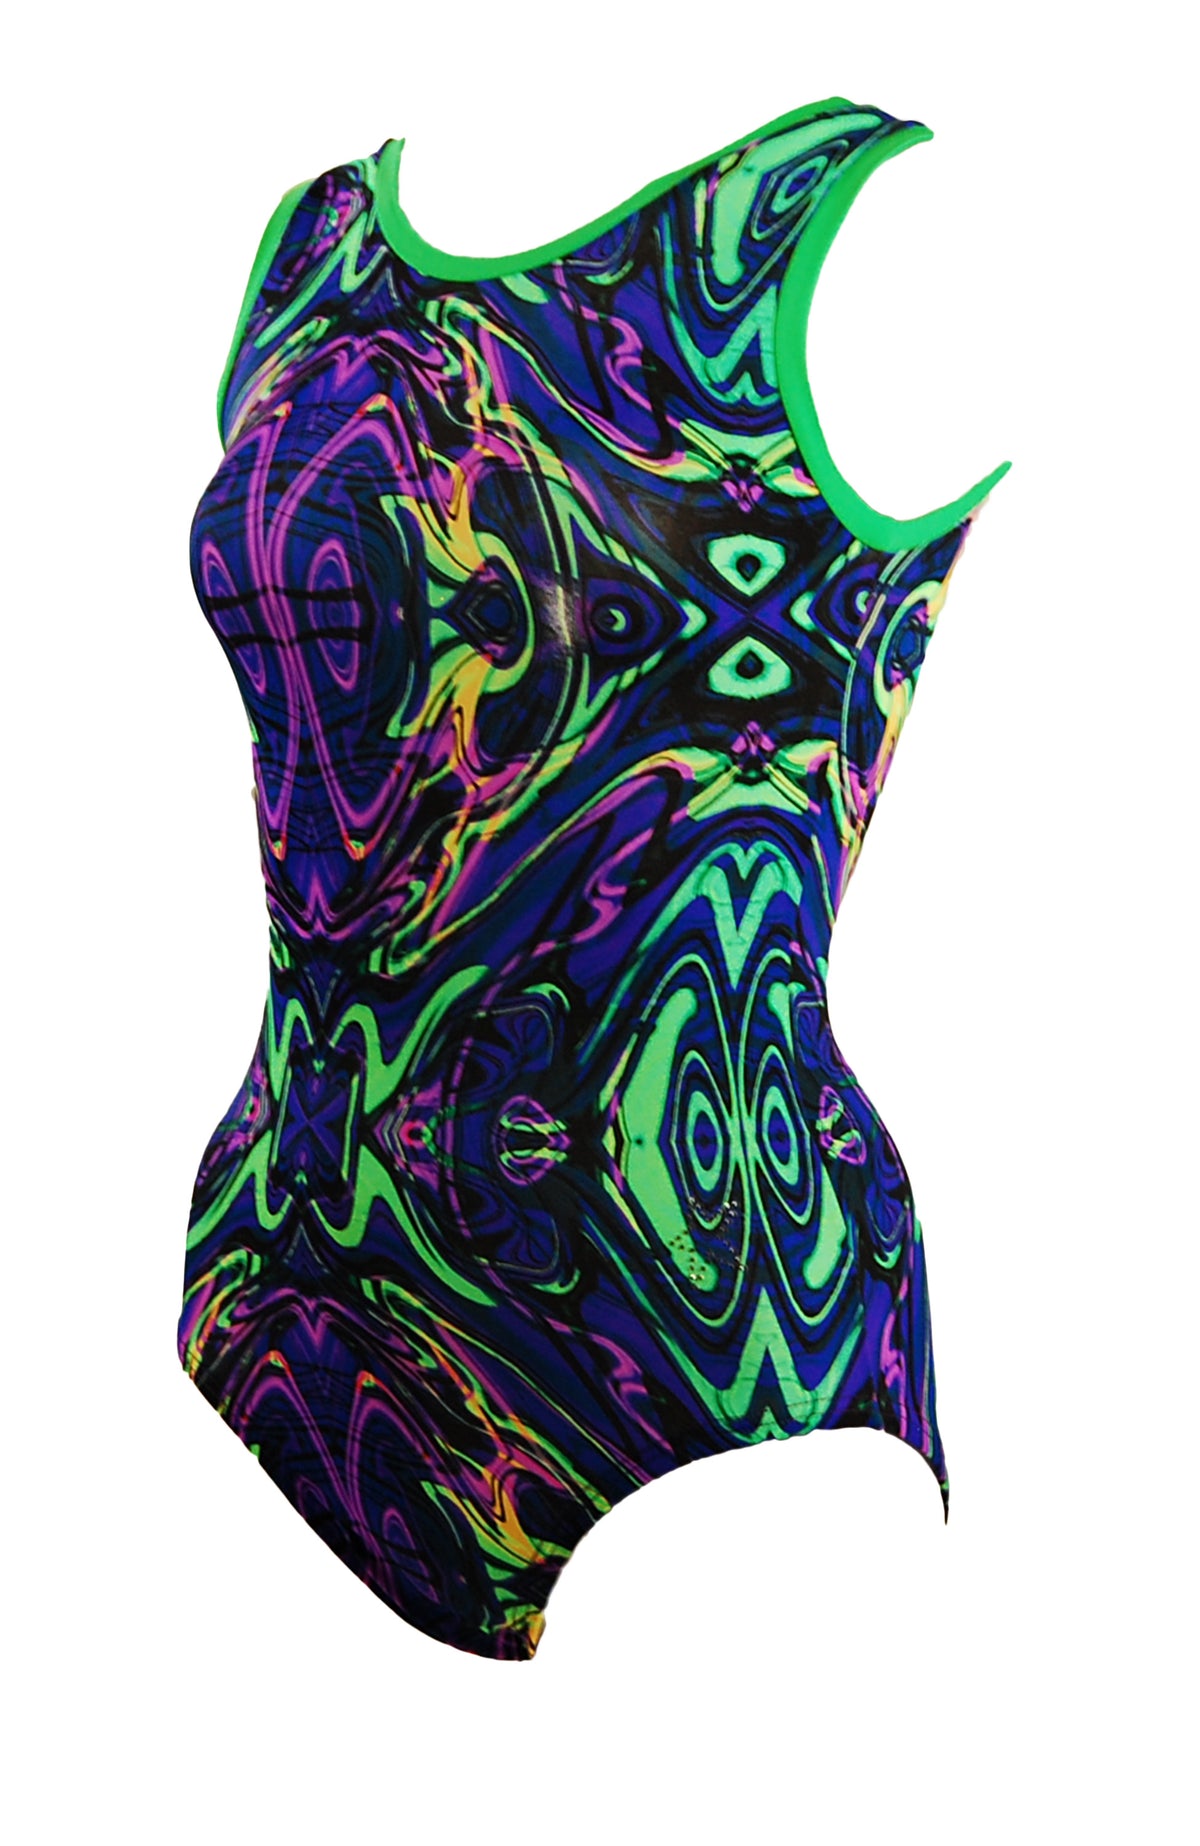 Side view of Tank style leotard purple/black/pink/lime